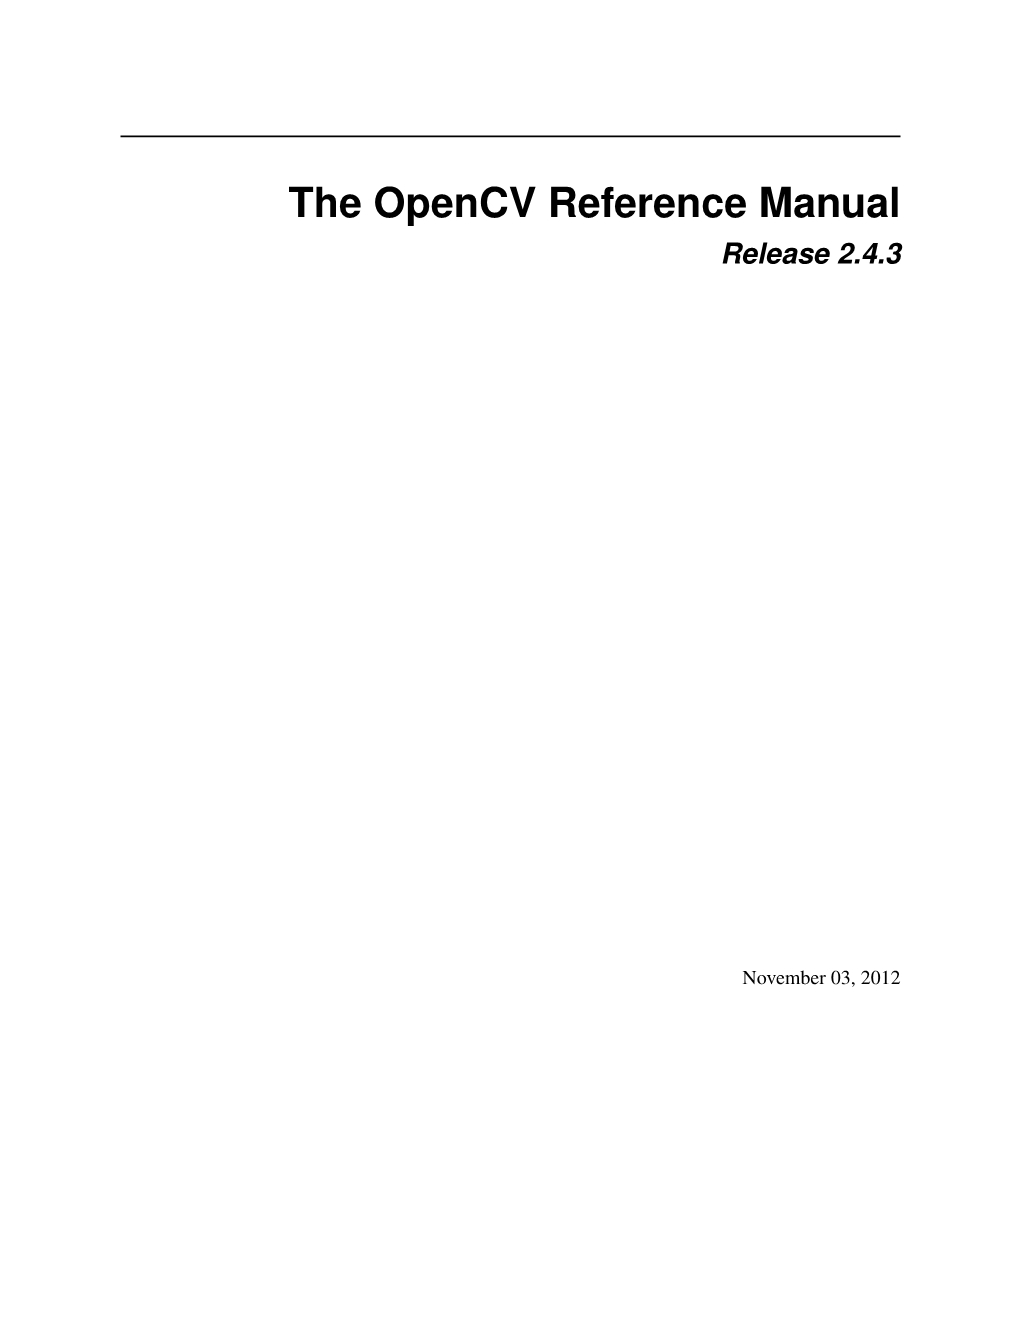 The Opencv Reference Manual, Release 2.4.3(Pdf)